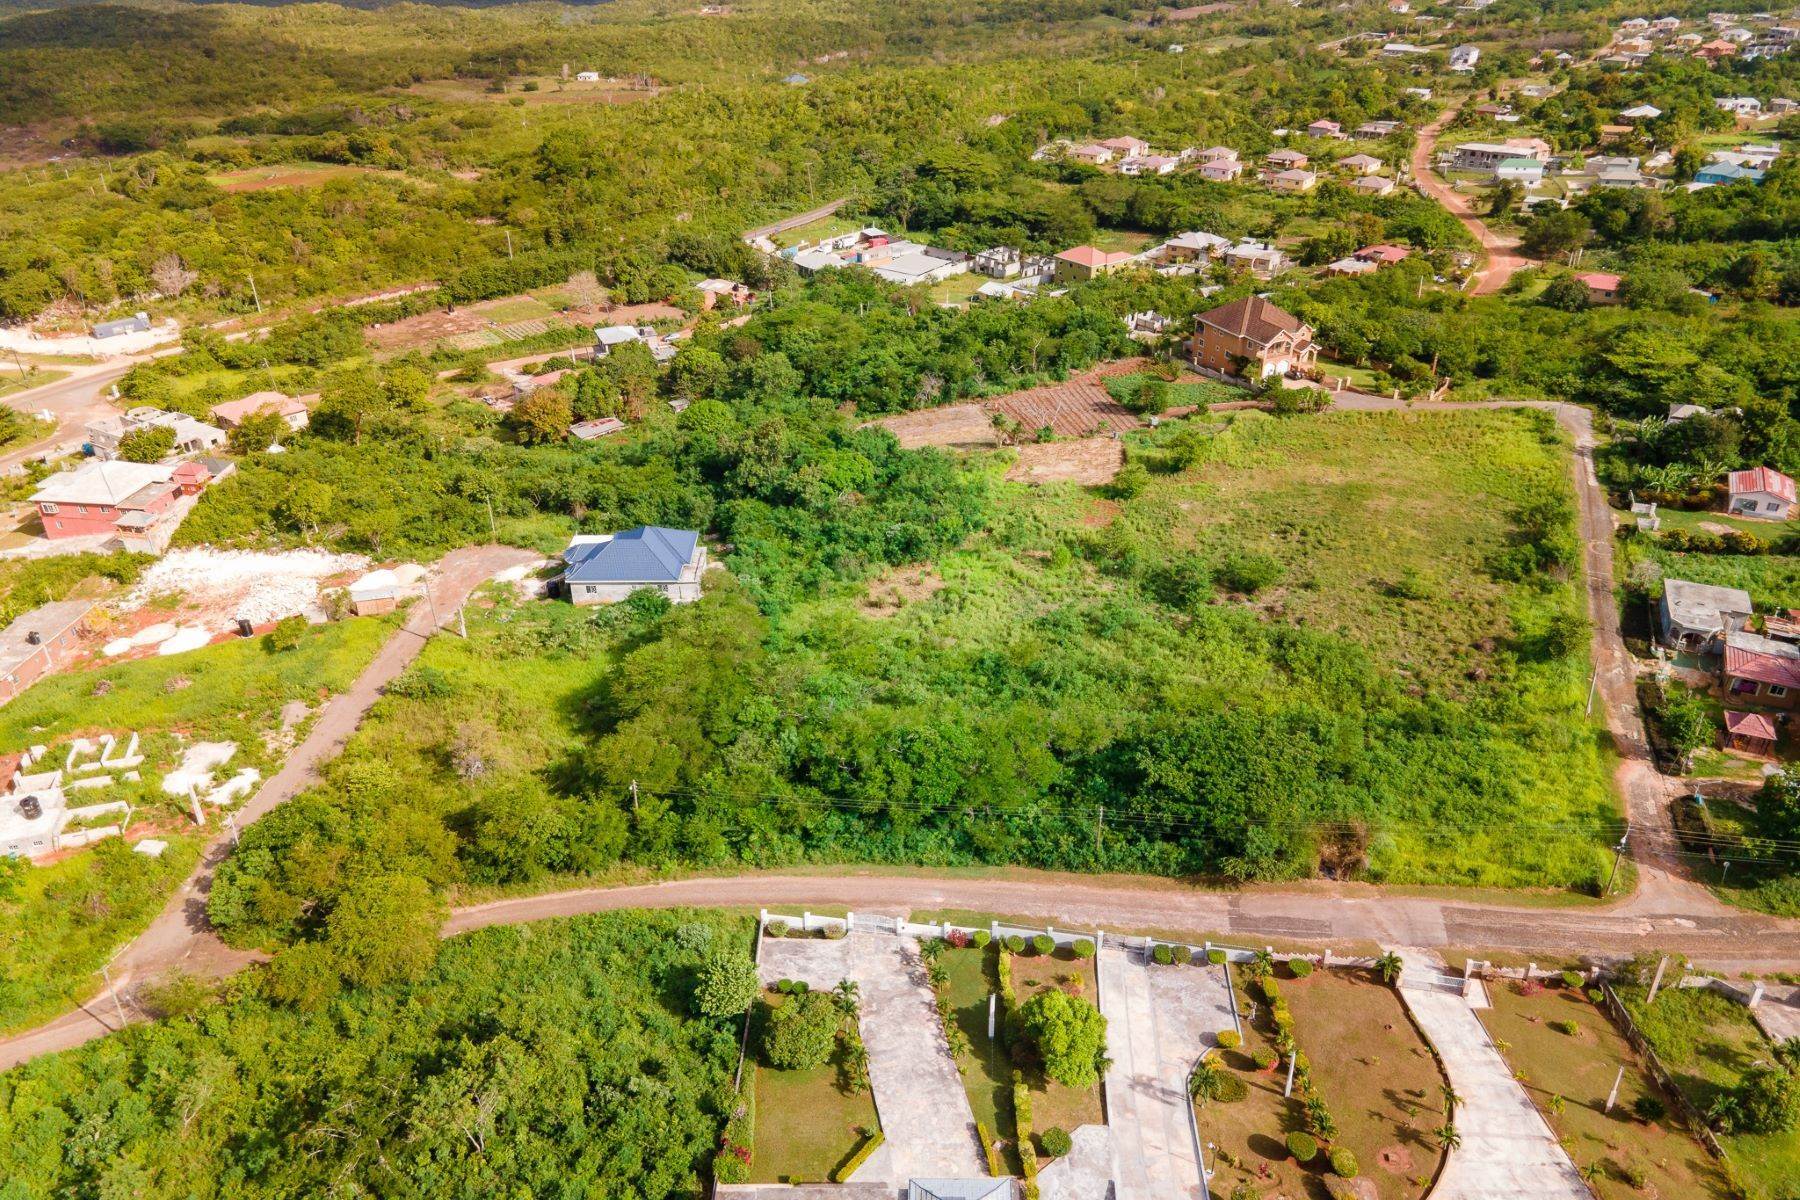 Property for Sale at Montpelier St Elizabeth Other Kingston and Saint Andrew, Kingston and Saint Andrew, Jamaica